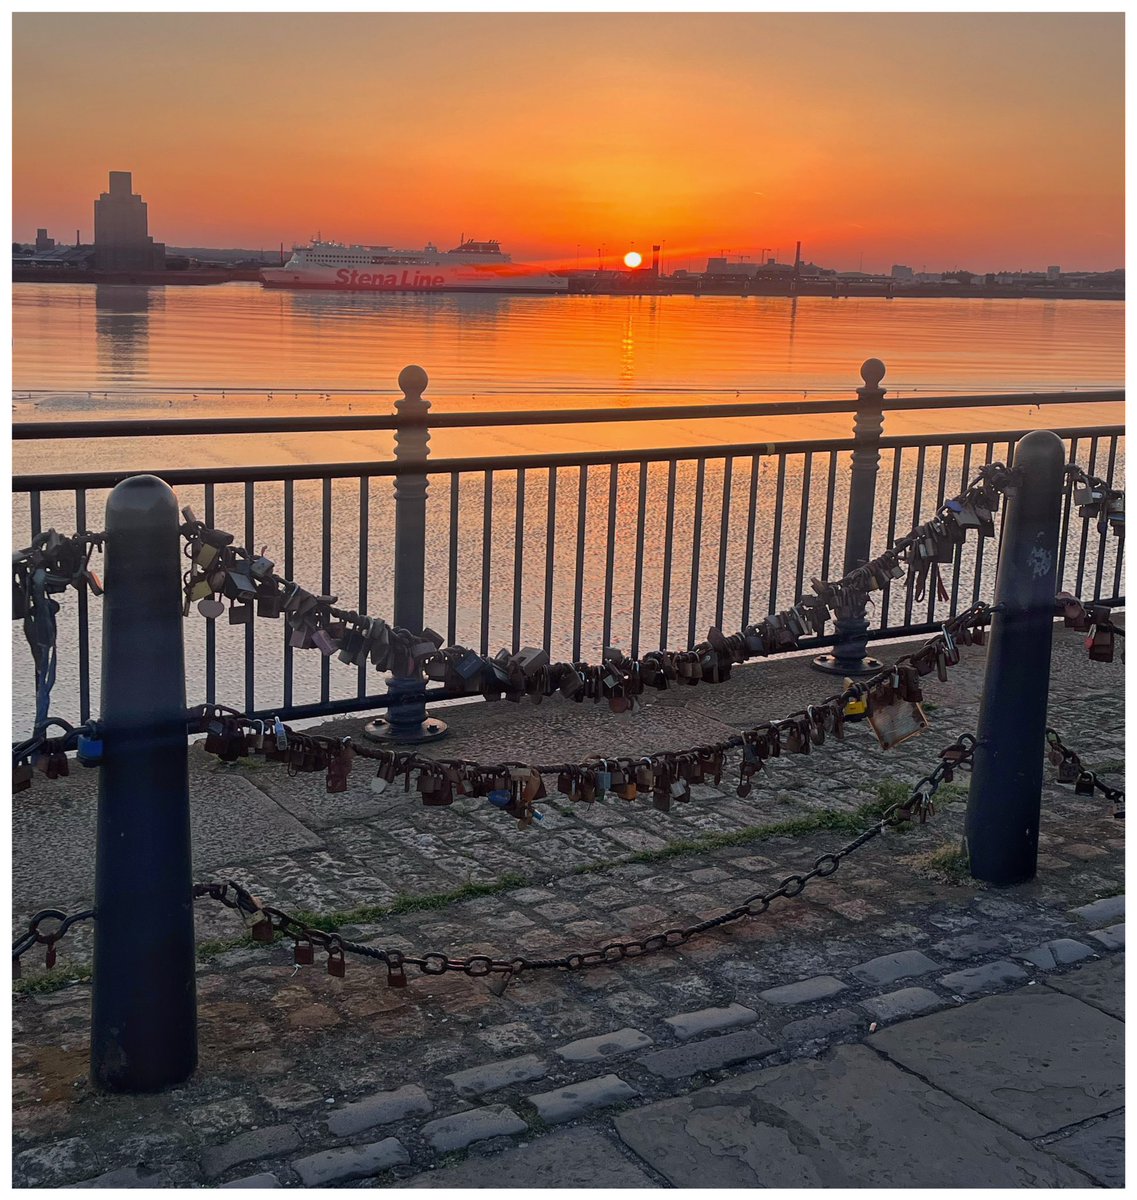 #IWSBrandedWear #belfasthour @katy_scarletta @9yardsArchitec_ @katy_scarletta @NIMentalHealth @FeelHypnosis interesting facts..the Mersey is one of the cleanest rivers in Europe and has a tidal range of around 15ft